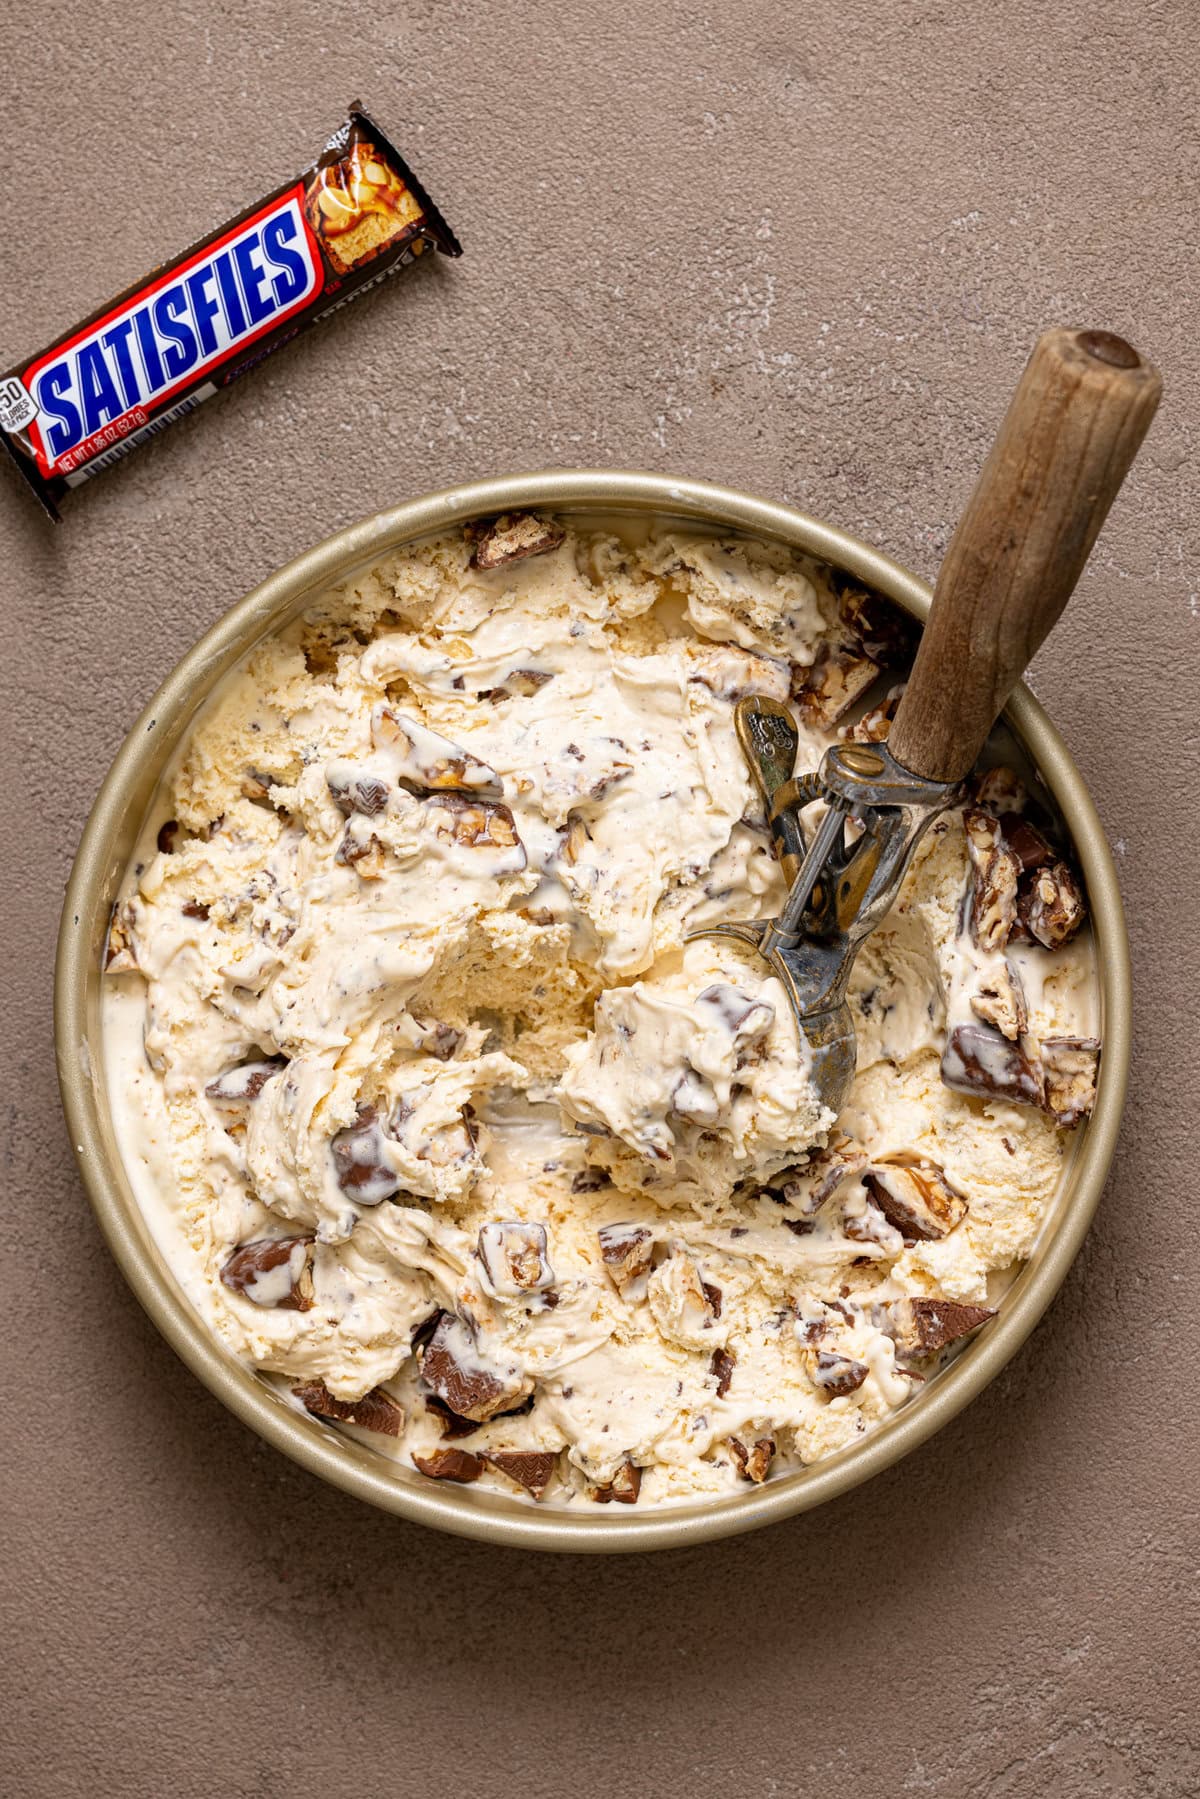 Snickers ice cream in a round metal pan on a greyish brown table with a scoop and candy bar.